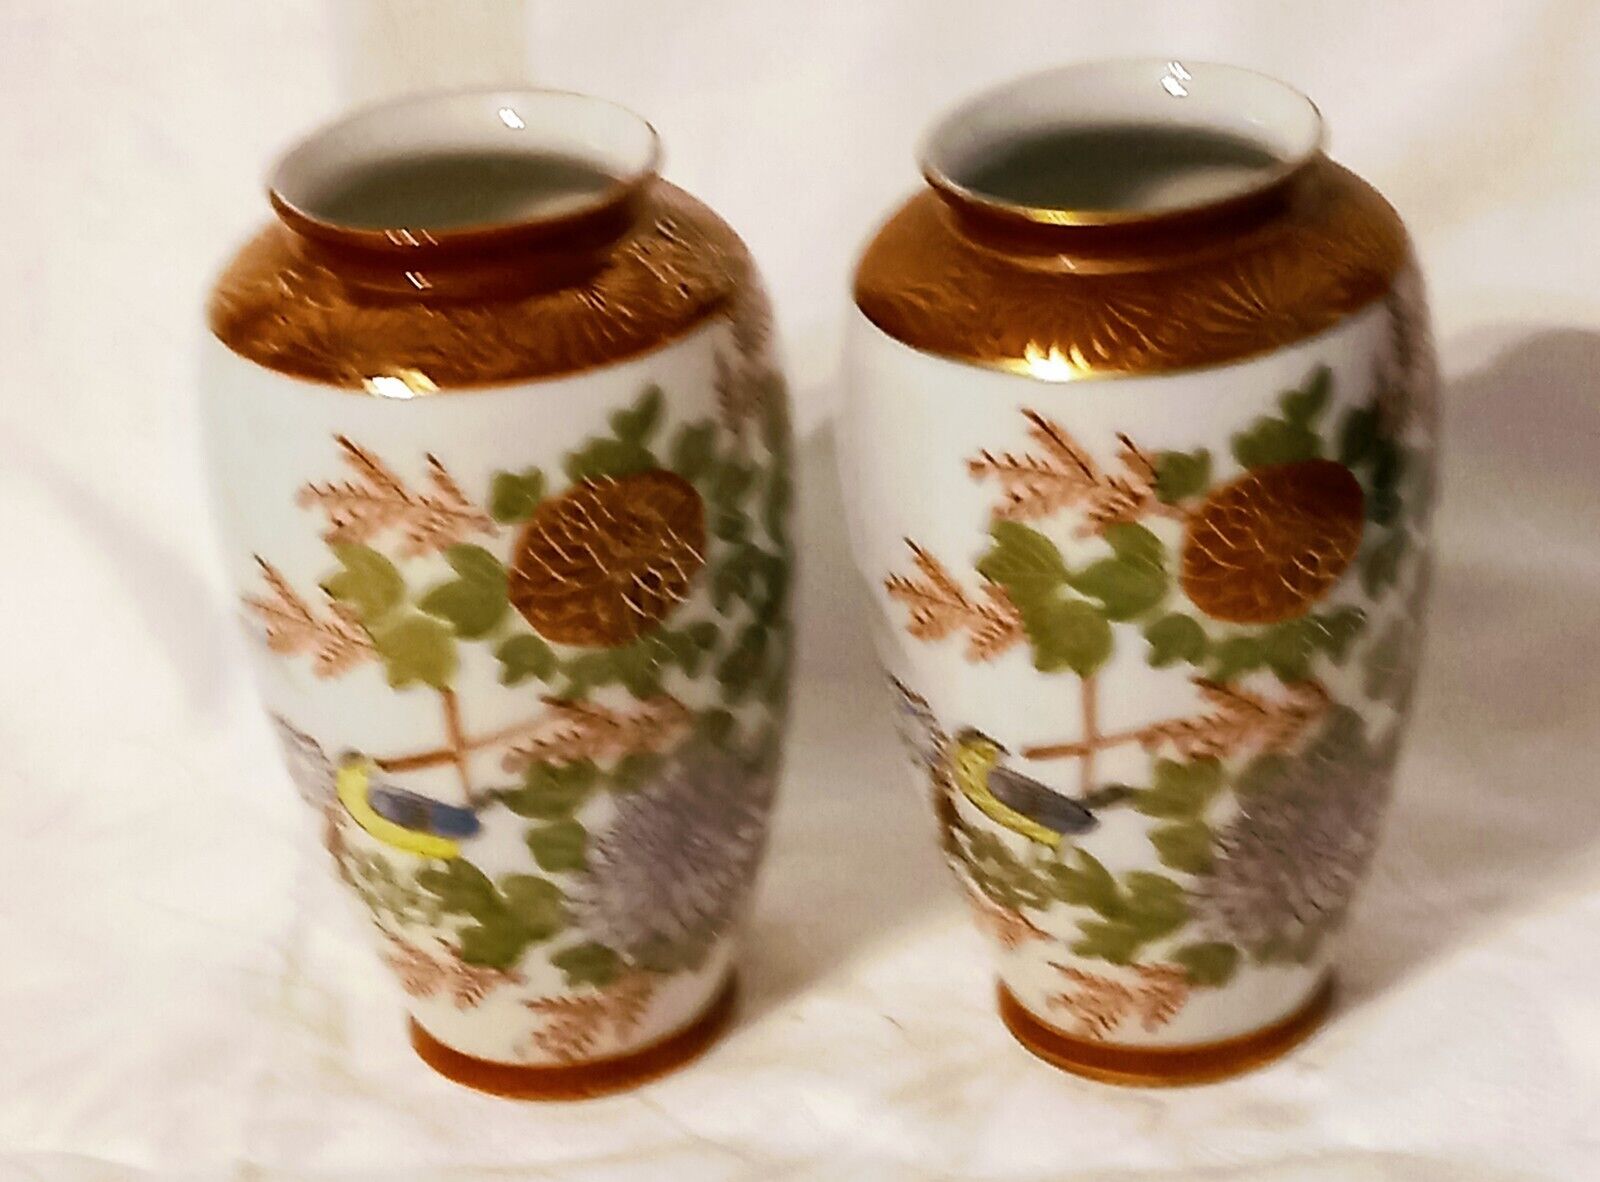 Antique Valuations: Pair Of Japanese Kutani Ware Vases Meiji Period   Height 5 inches